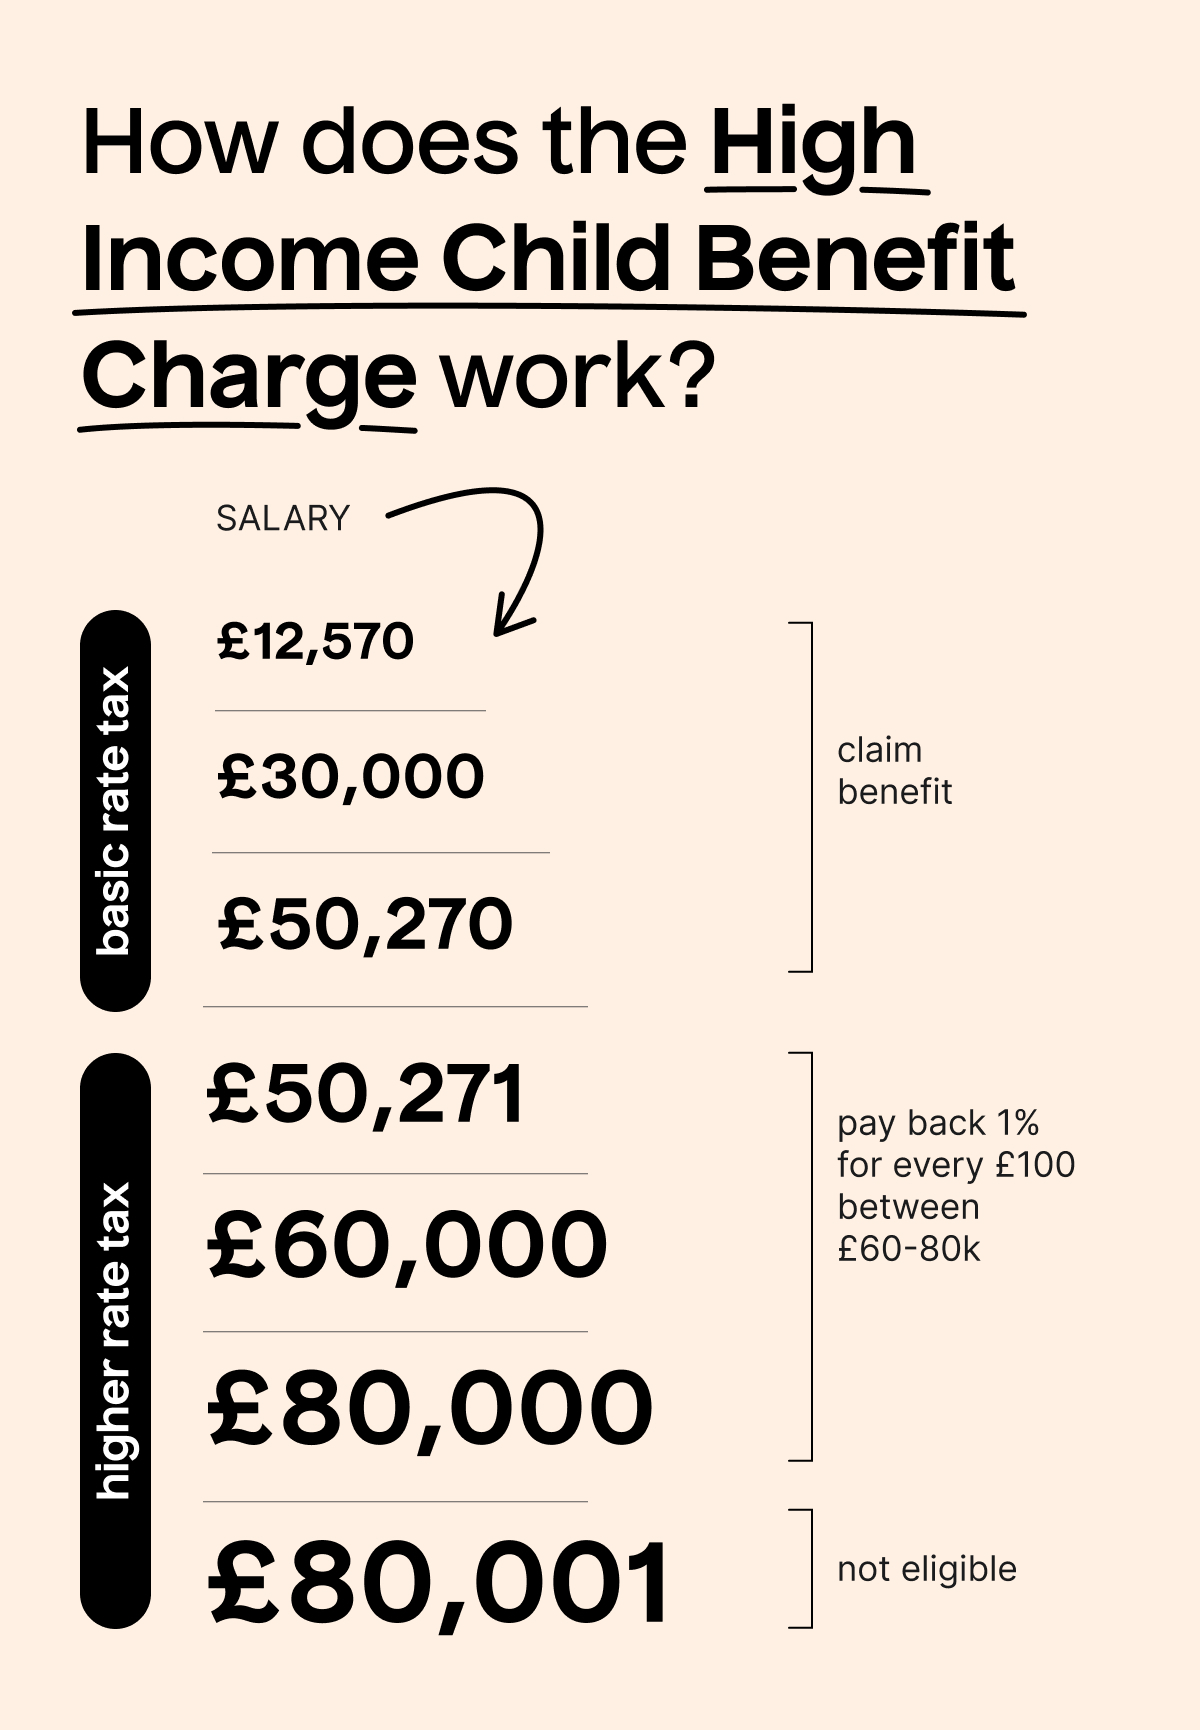 High income child benefit charge